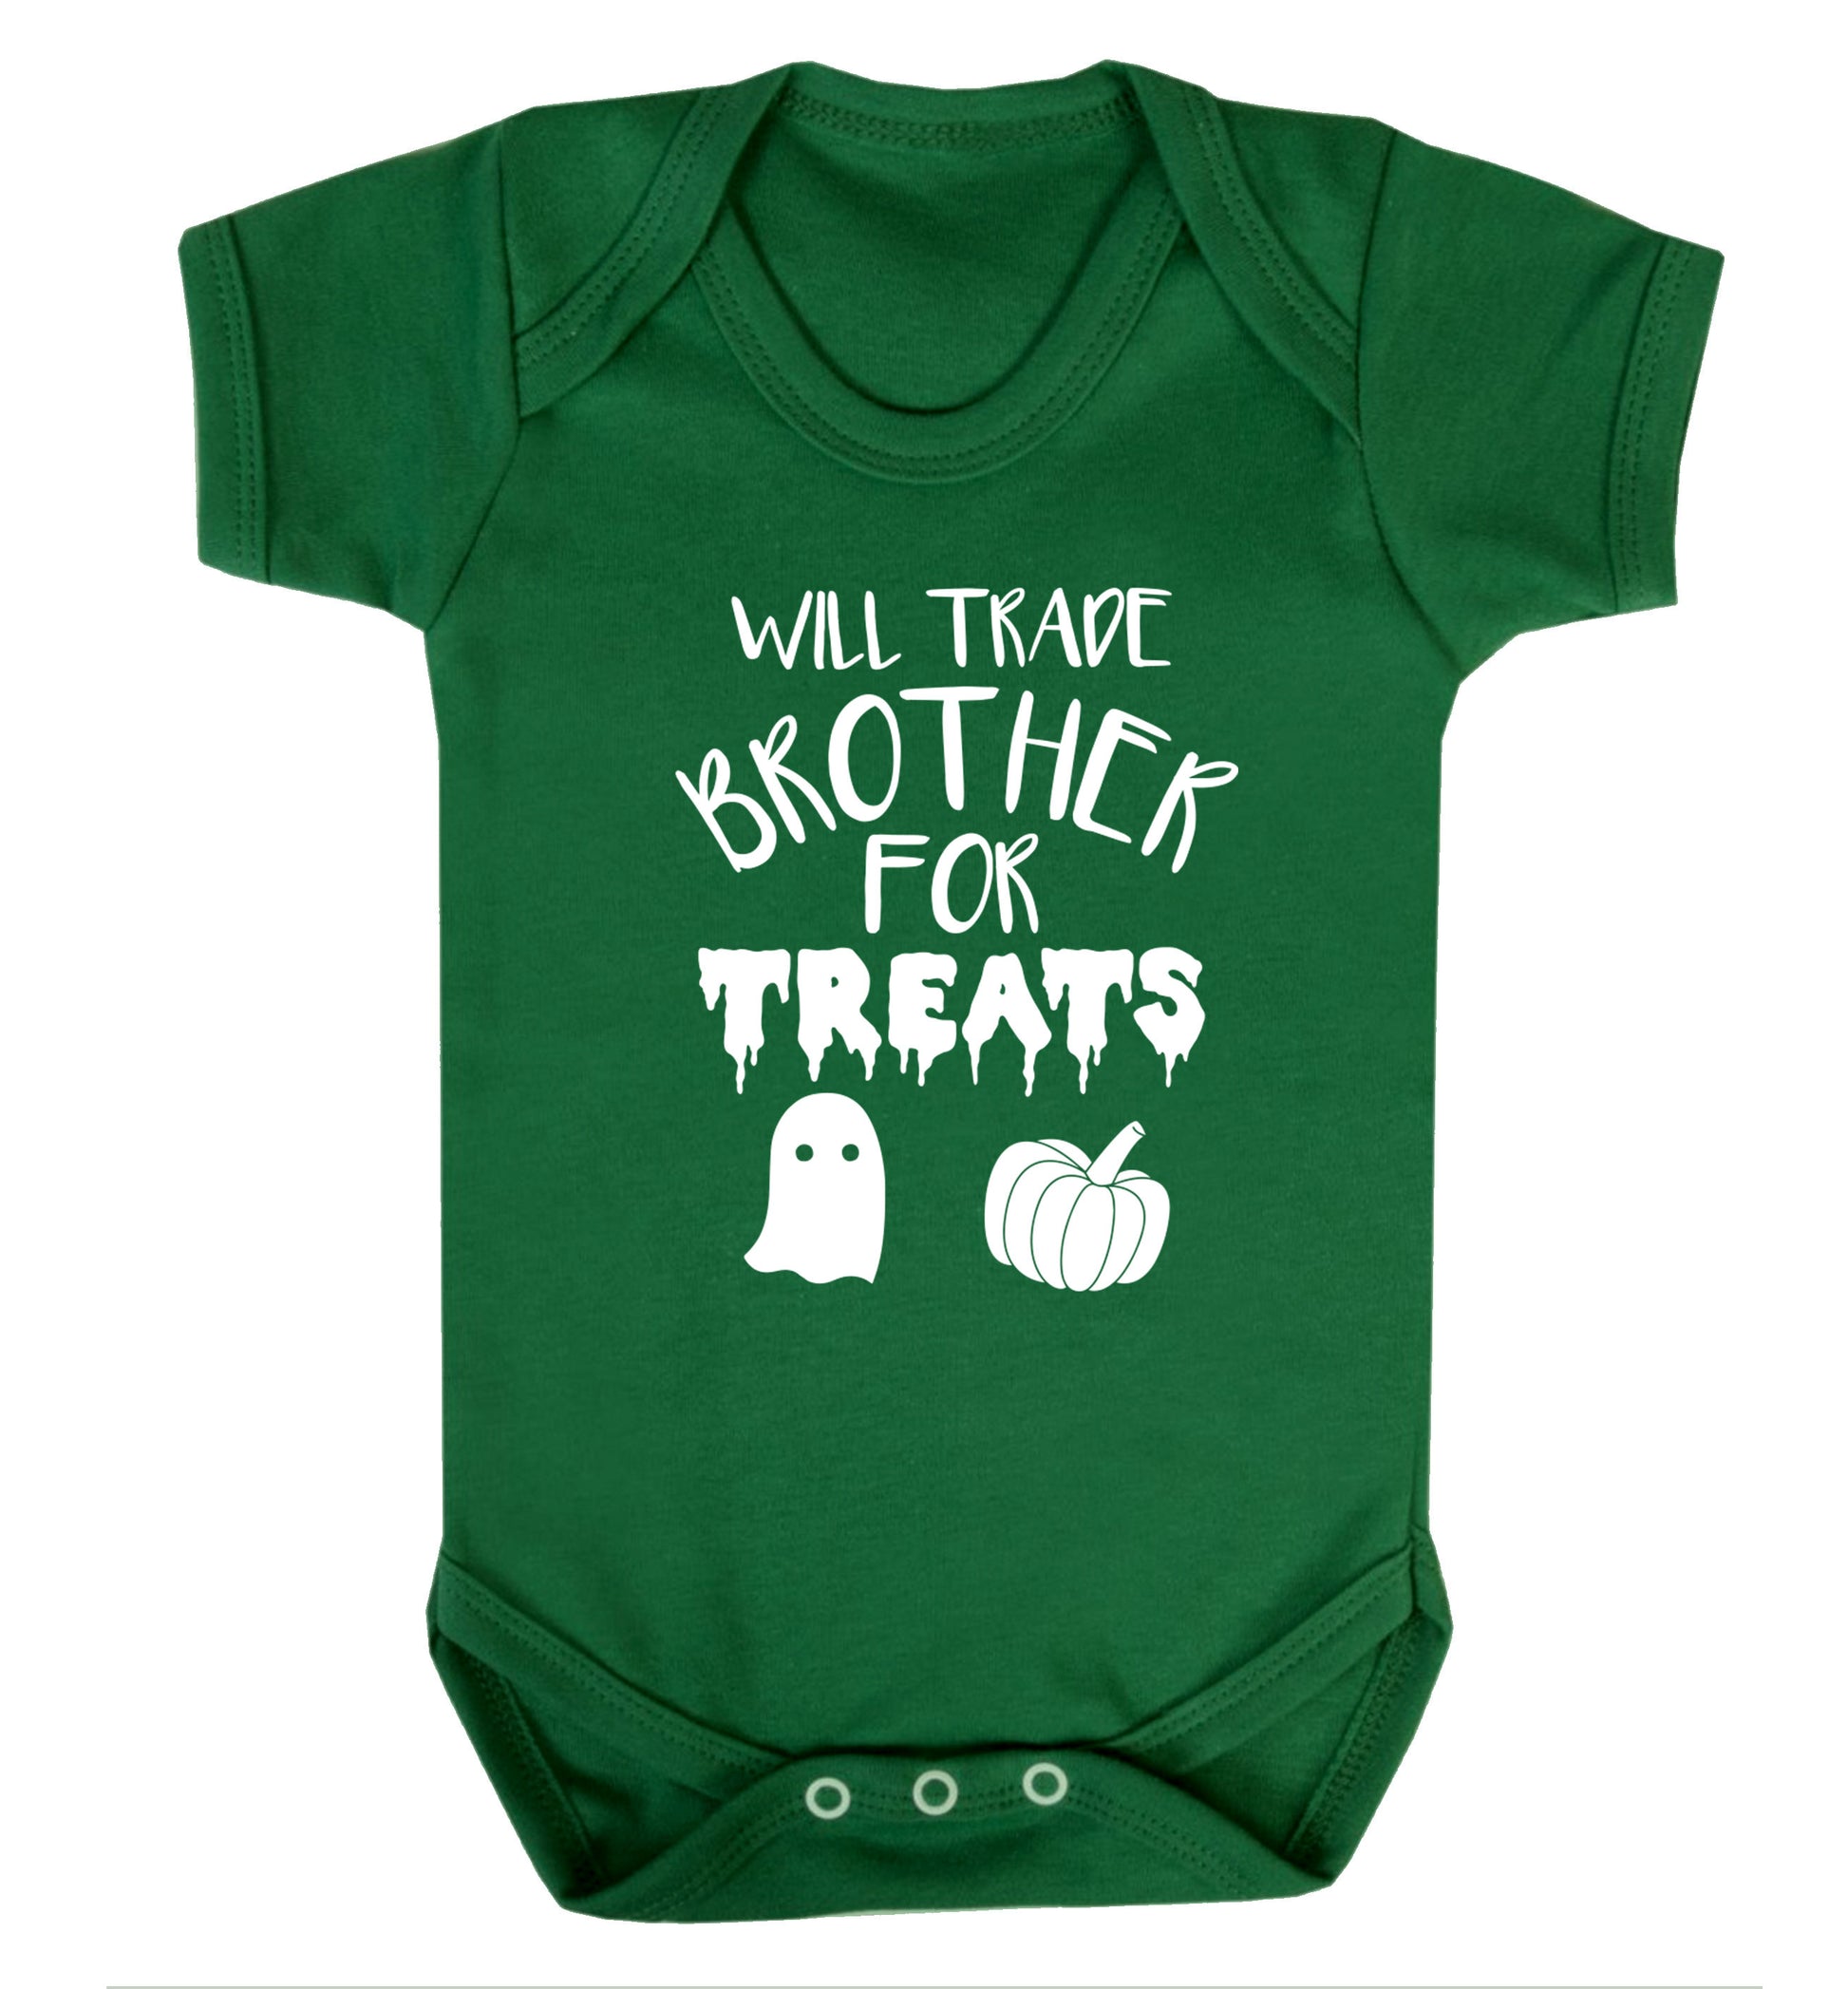 Will trade brother for treats Baby Vest green 18-24 months